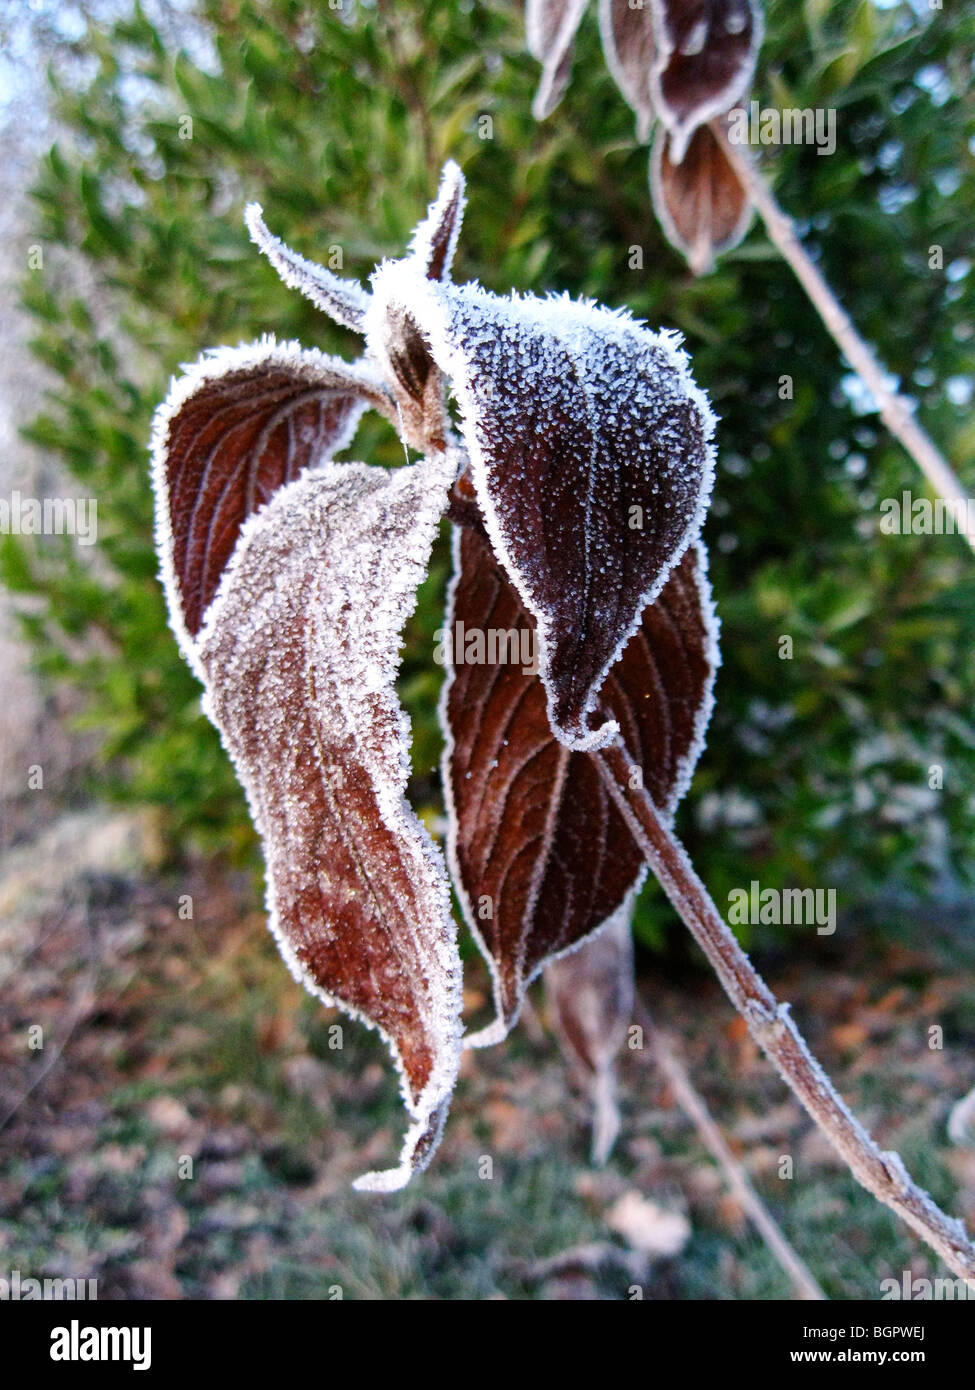 A frozen Weigela plant in winter (Bristol Ruby Red variety), placed in front of a lush green bush Stock Photo